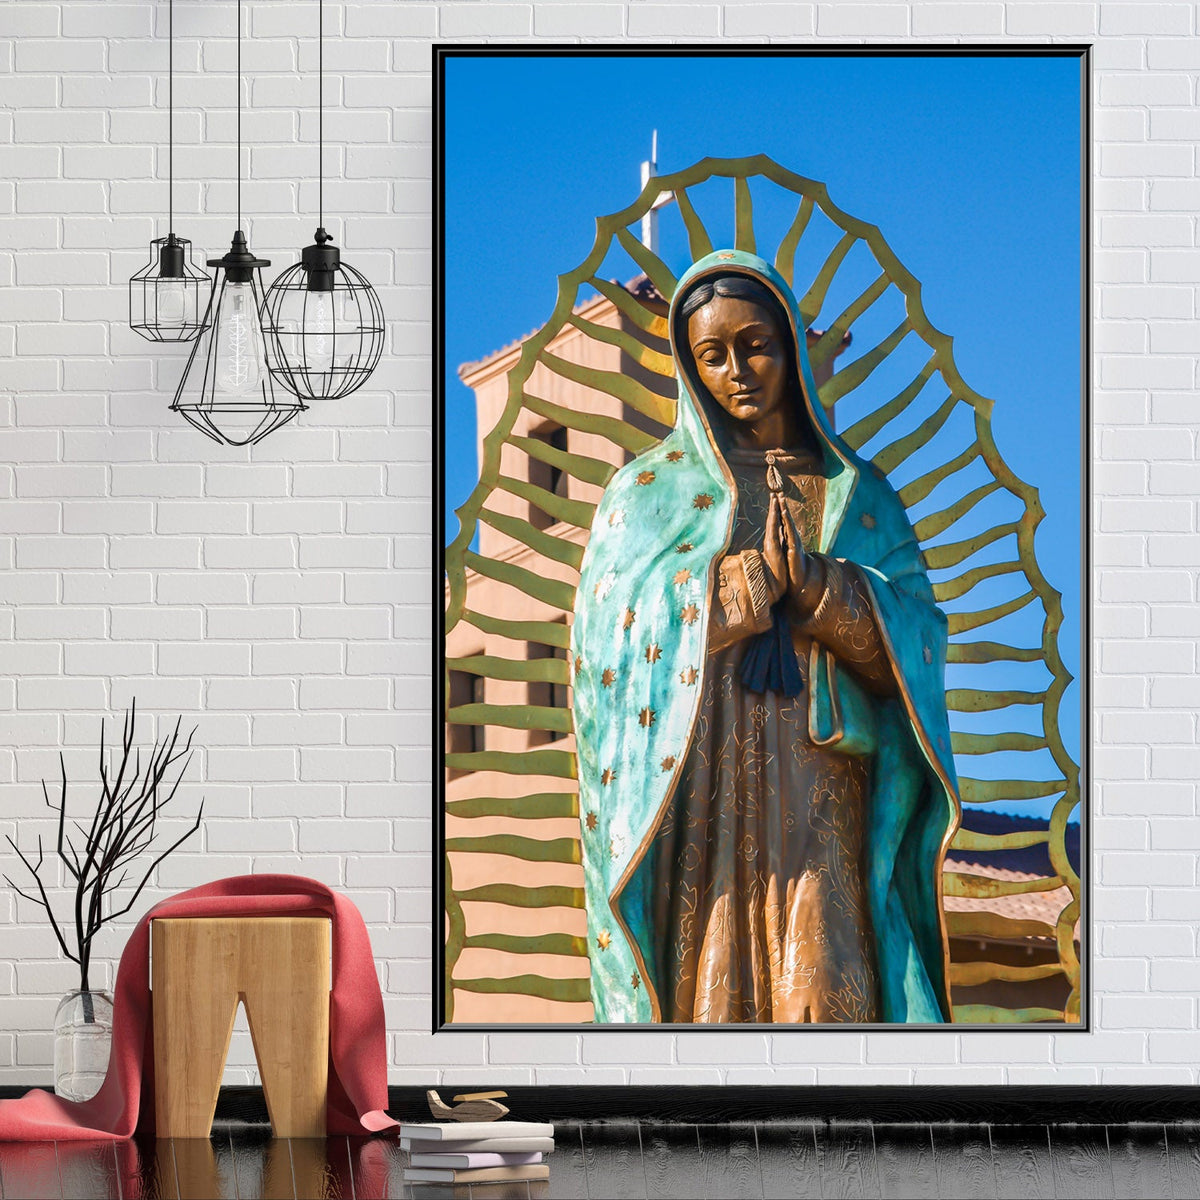 https://cdn.shopify.com/s/files/1/0387/9986/8044/products/OurBlessedLadyofGuadalupeCanvasArtprintFloatingFrame-1.jpg